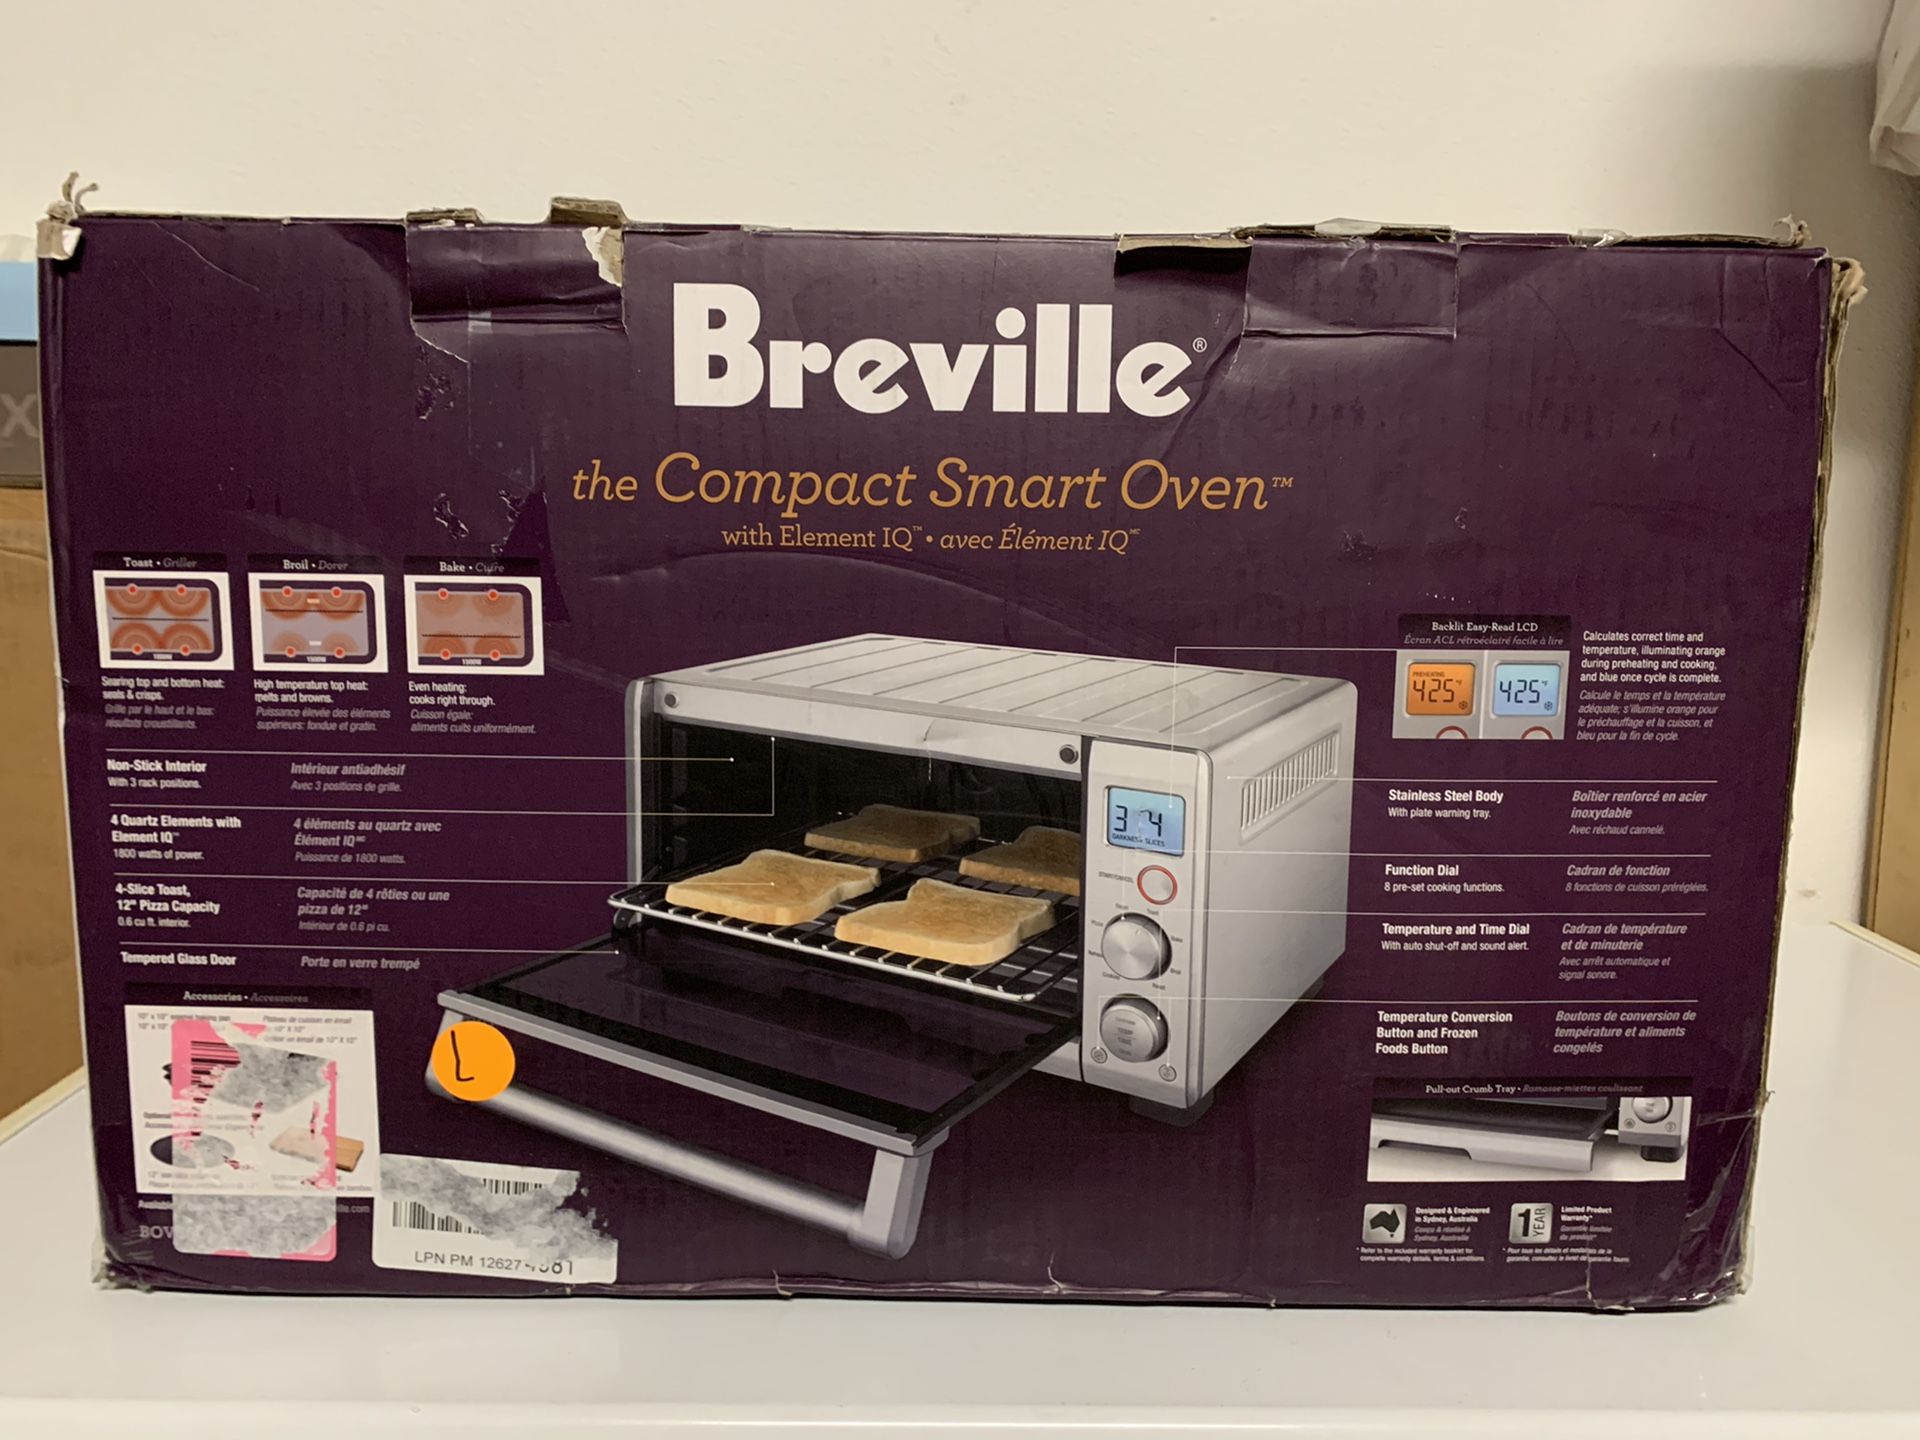 Breville “Compact Smart Oven”